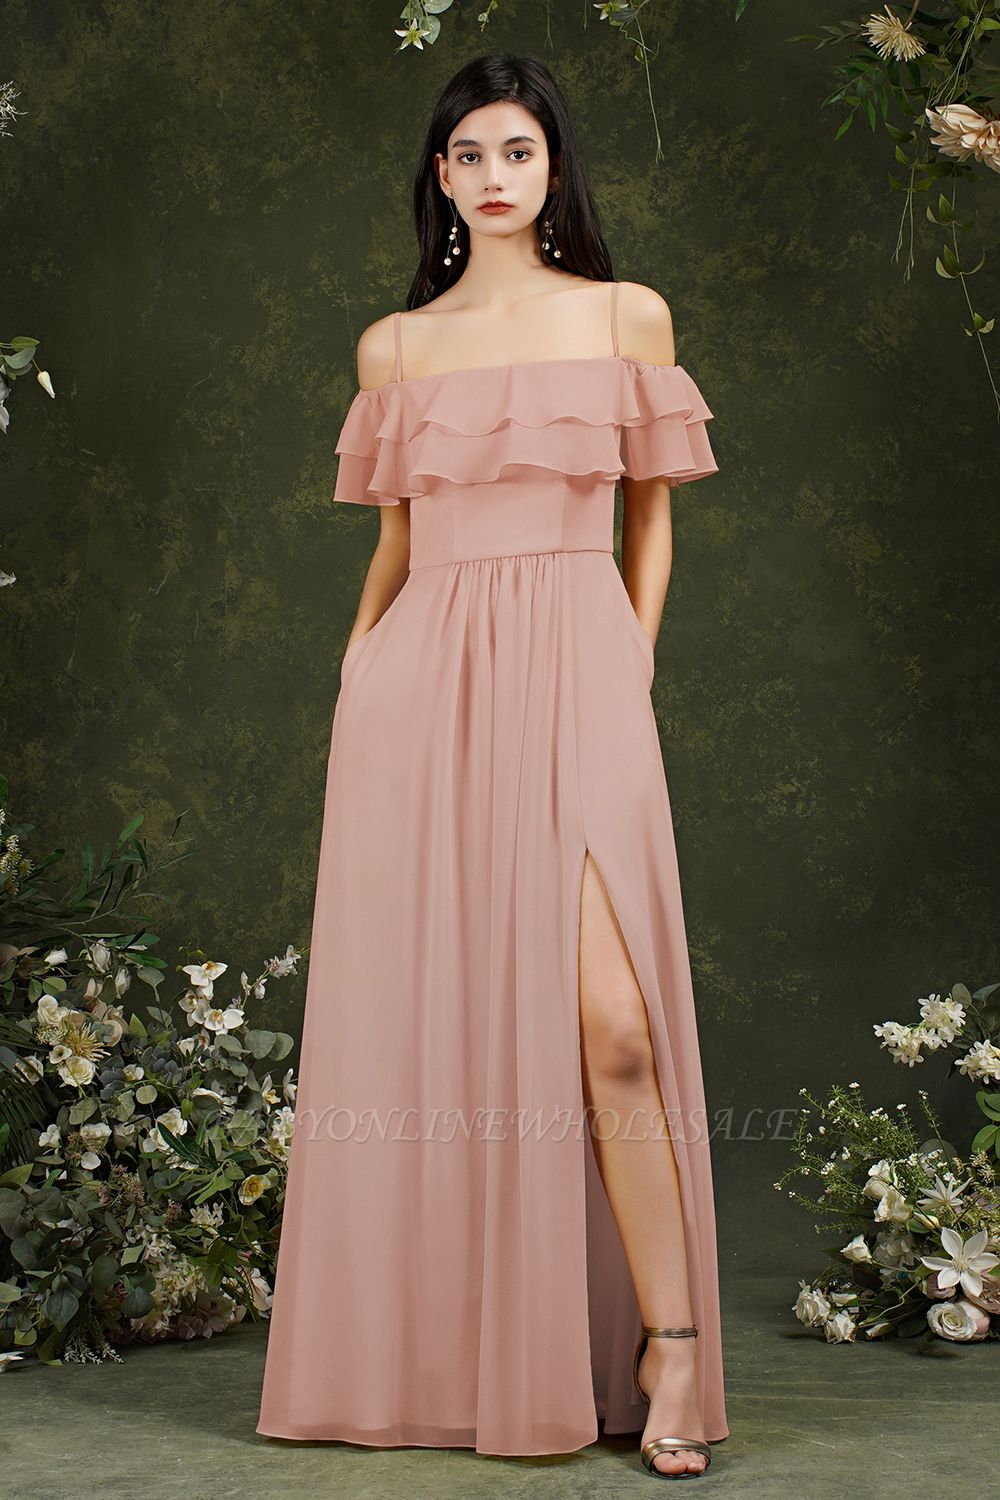 Spaghetti Strapes Off-the-shoulder Split Front Tulle Prom Dress